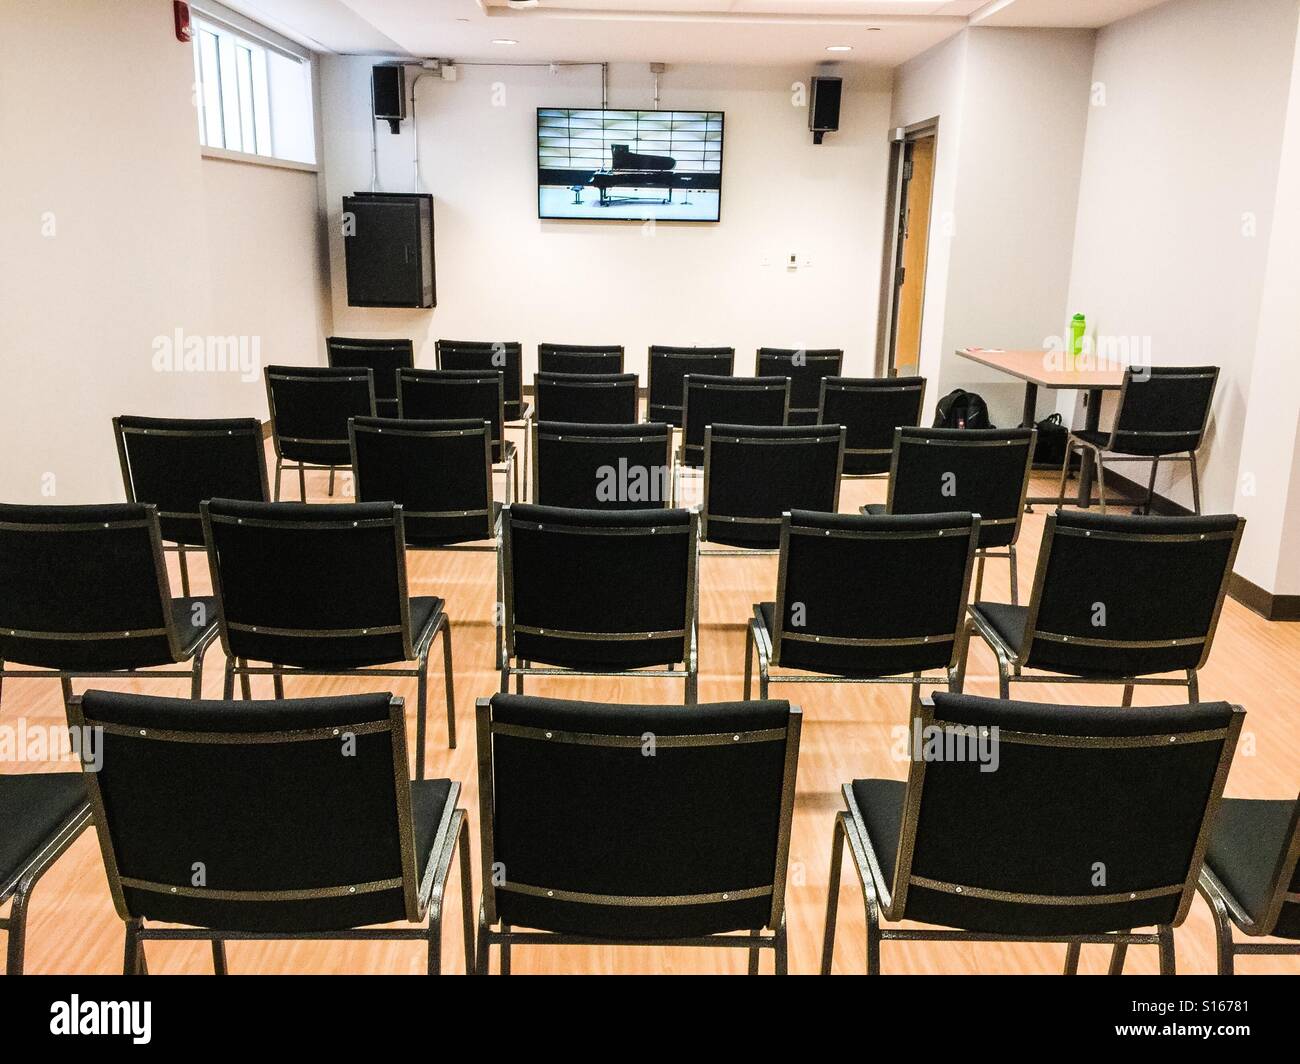 Empty room with chairs, state-of-the art audio-visual equipment. Perfect for overflow audience or small groups. Modern interior. Ontario, Canada. Stock Photo